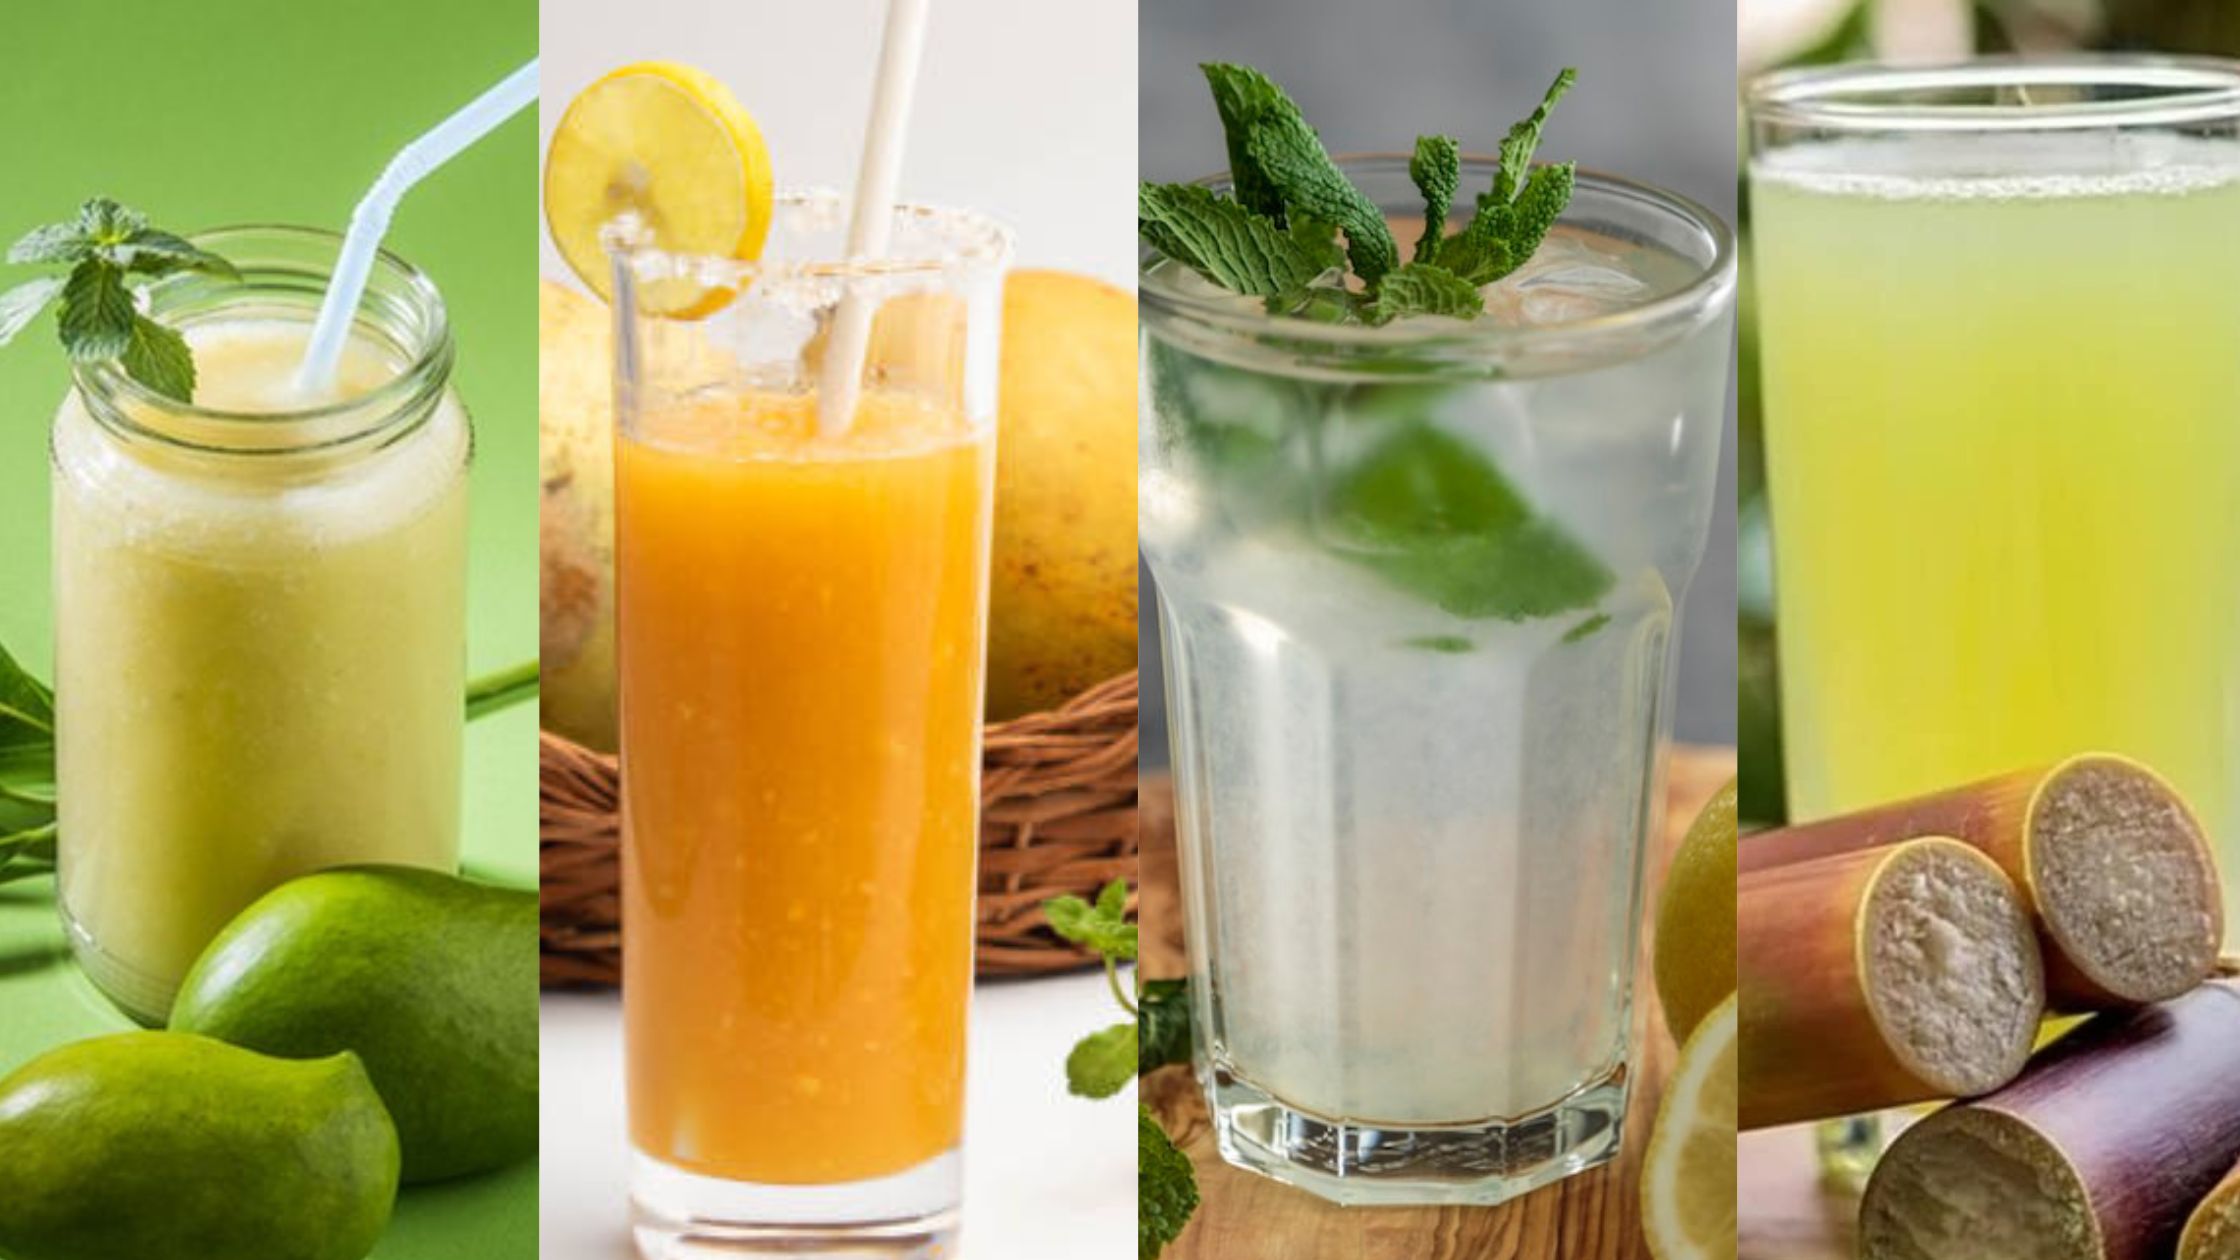 Top 10 Summer Drinks To Beat The Heat